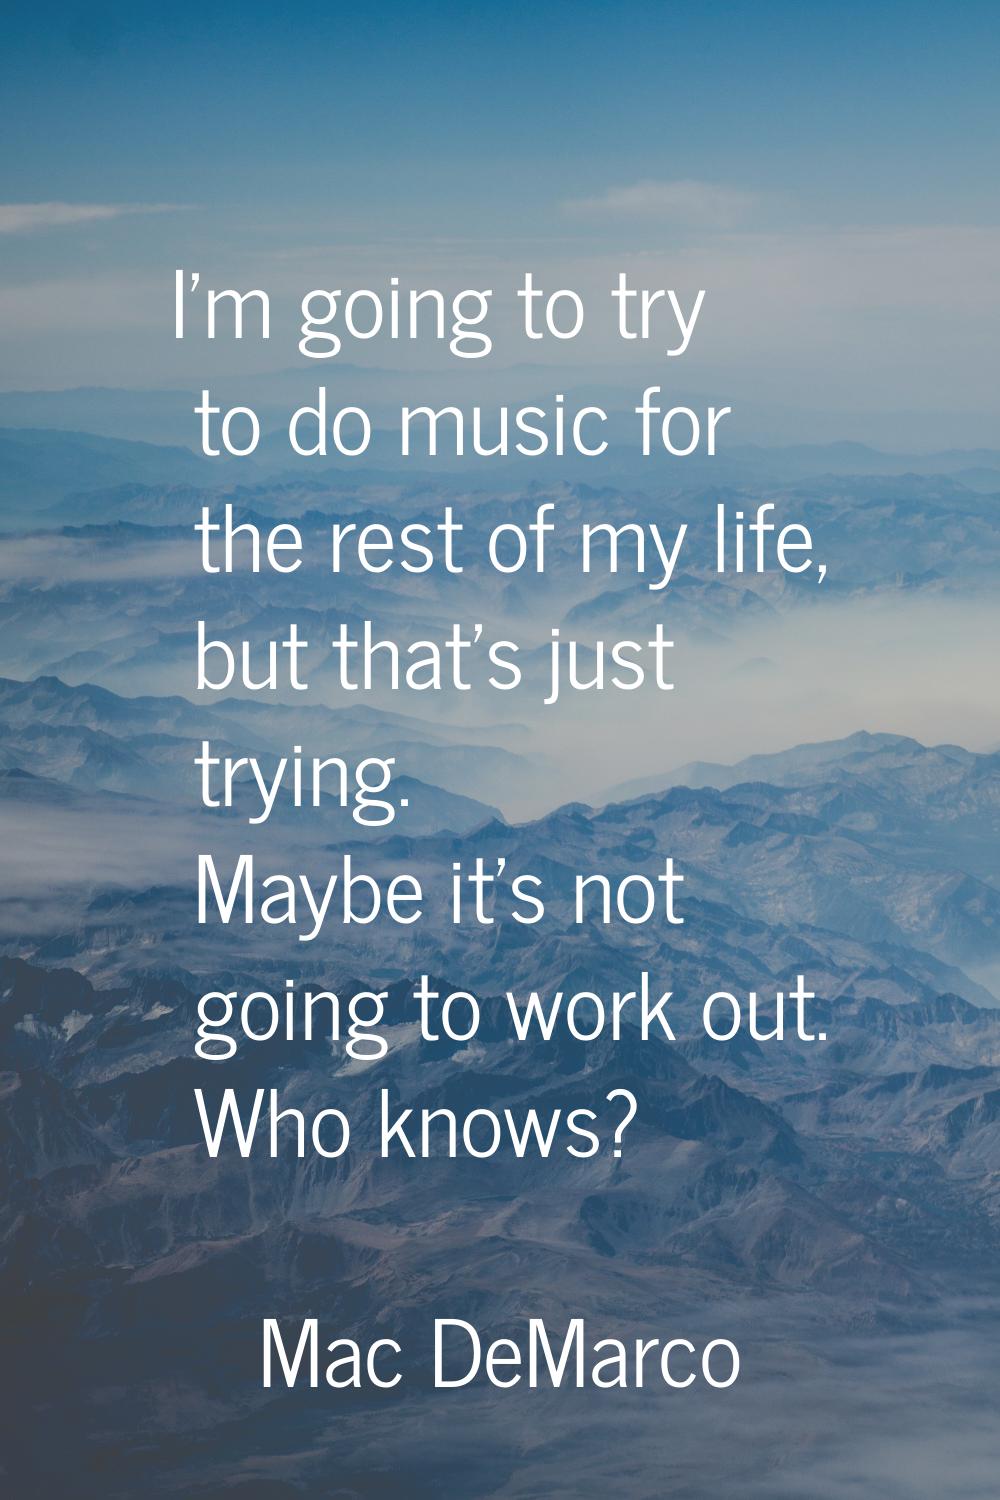 I'm going to try to do music for the rest of my life, but that's just trying. Maybe it's not going 